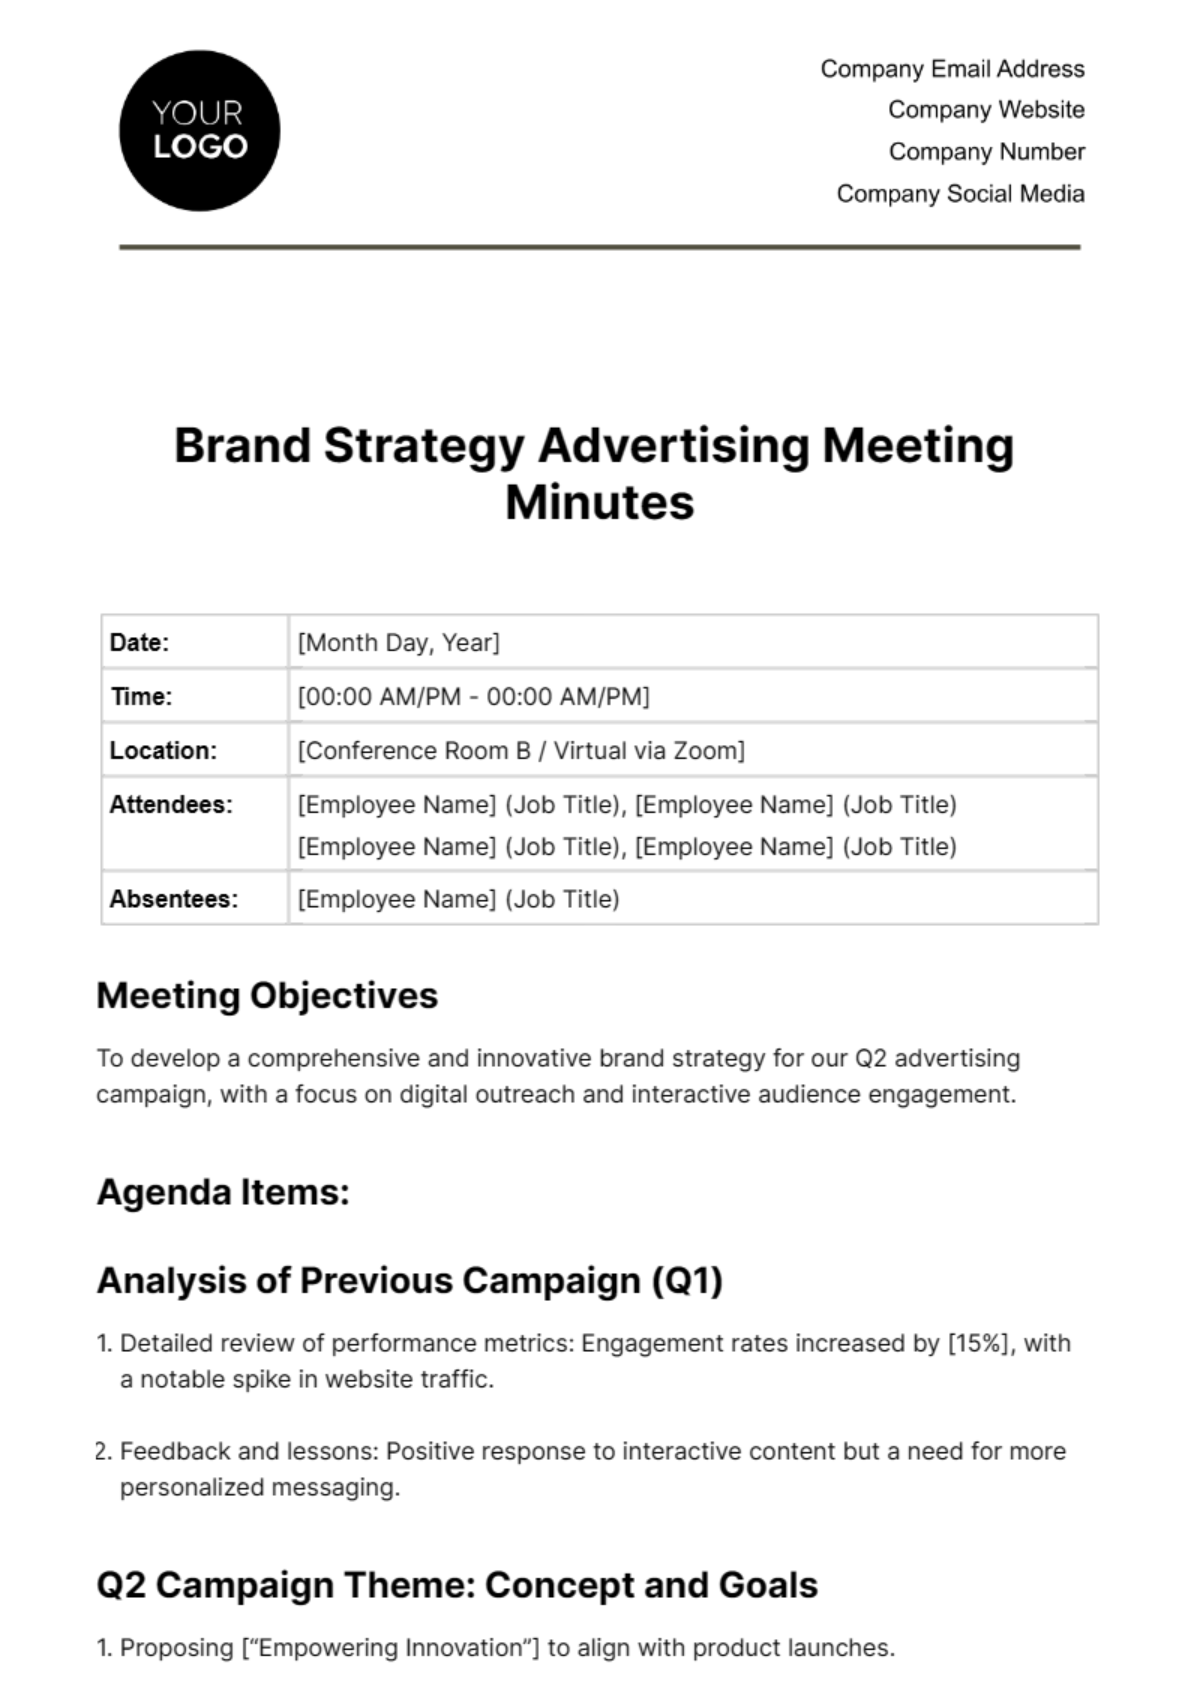 Free Brand Strategy Advertising Meeting Minutes Template